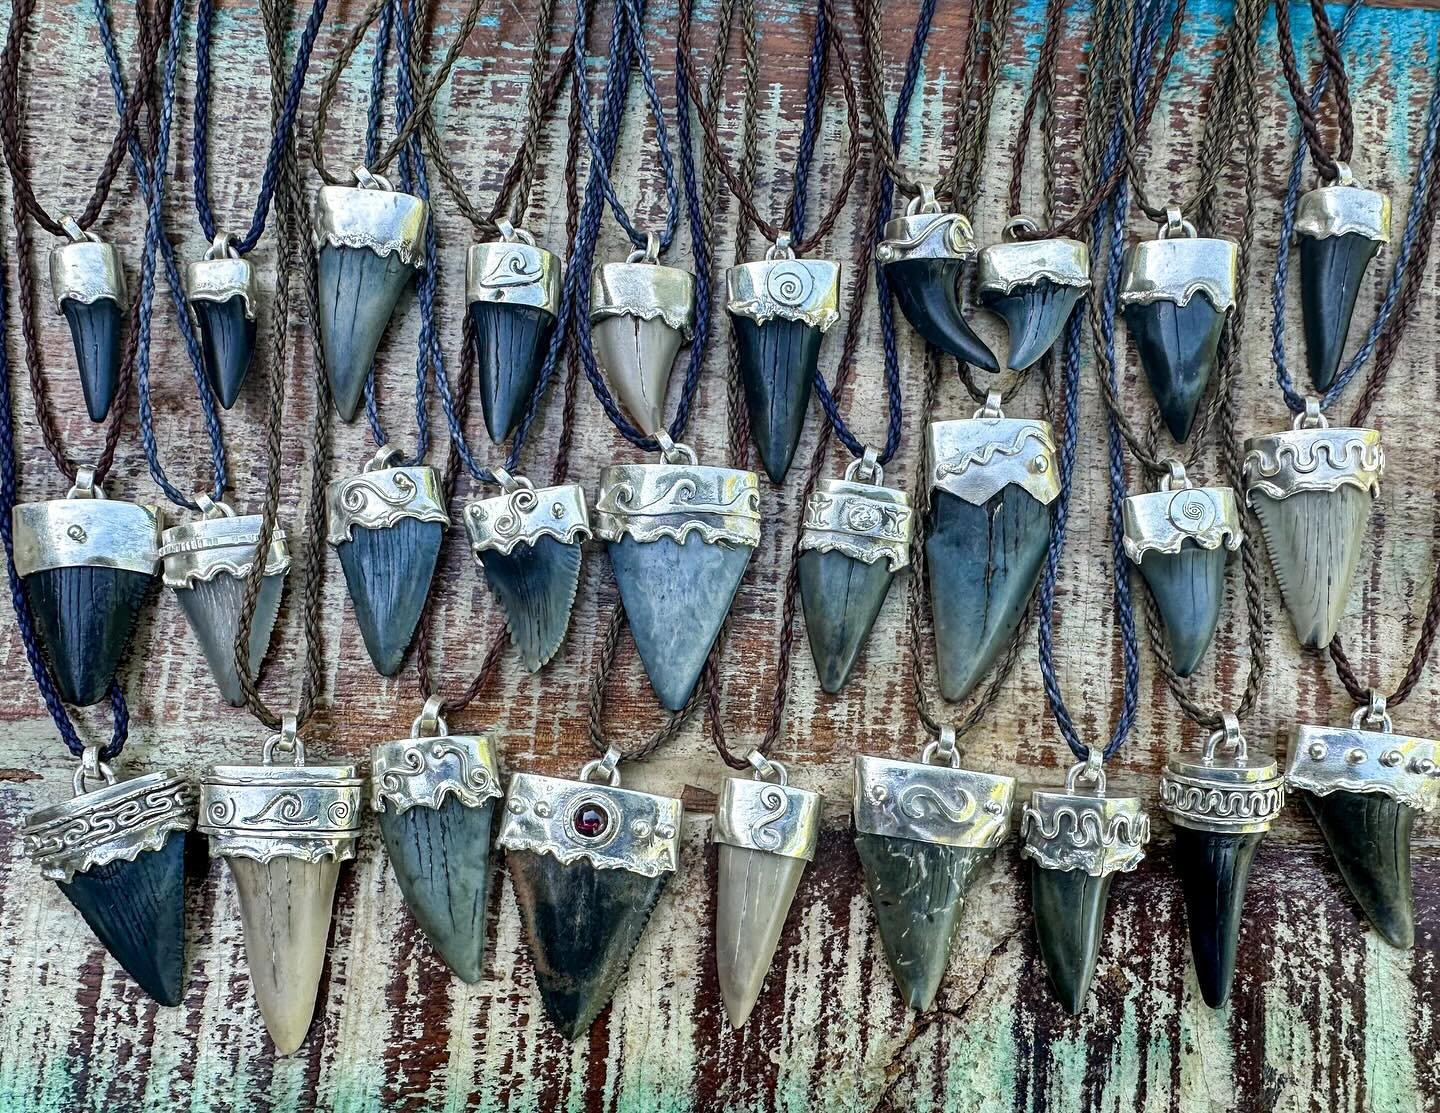 JUST IN - Sterling silver pendants with prehistoric shark teeth collected in the Carolinas🦈✨
These are one of a kind &amp; sure to be good luck charms for waterman &amp; women 🔱
We haven&rsquo;t put them out in the shop yet&hellip; But, if you have